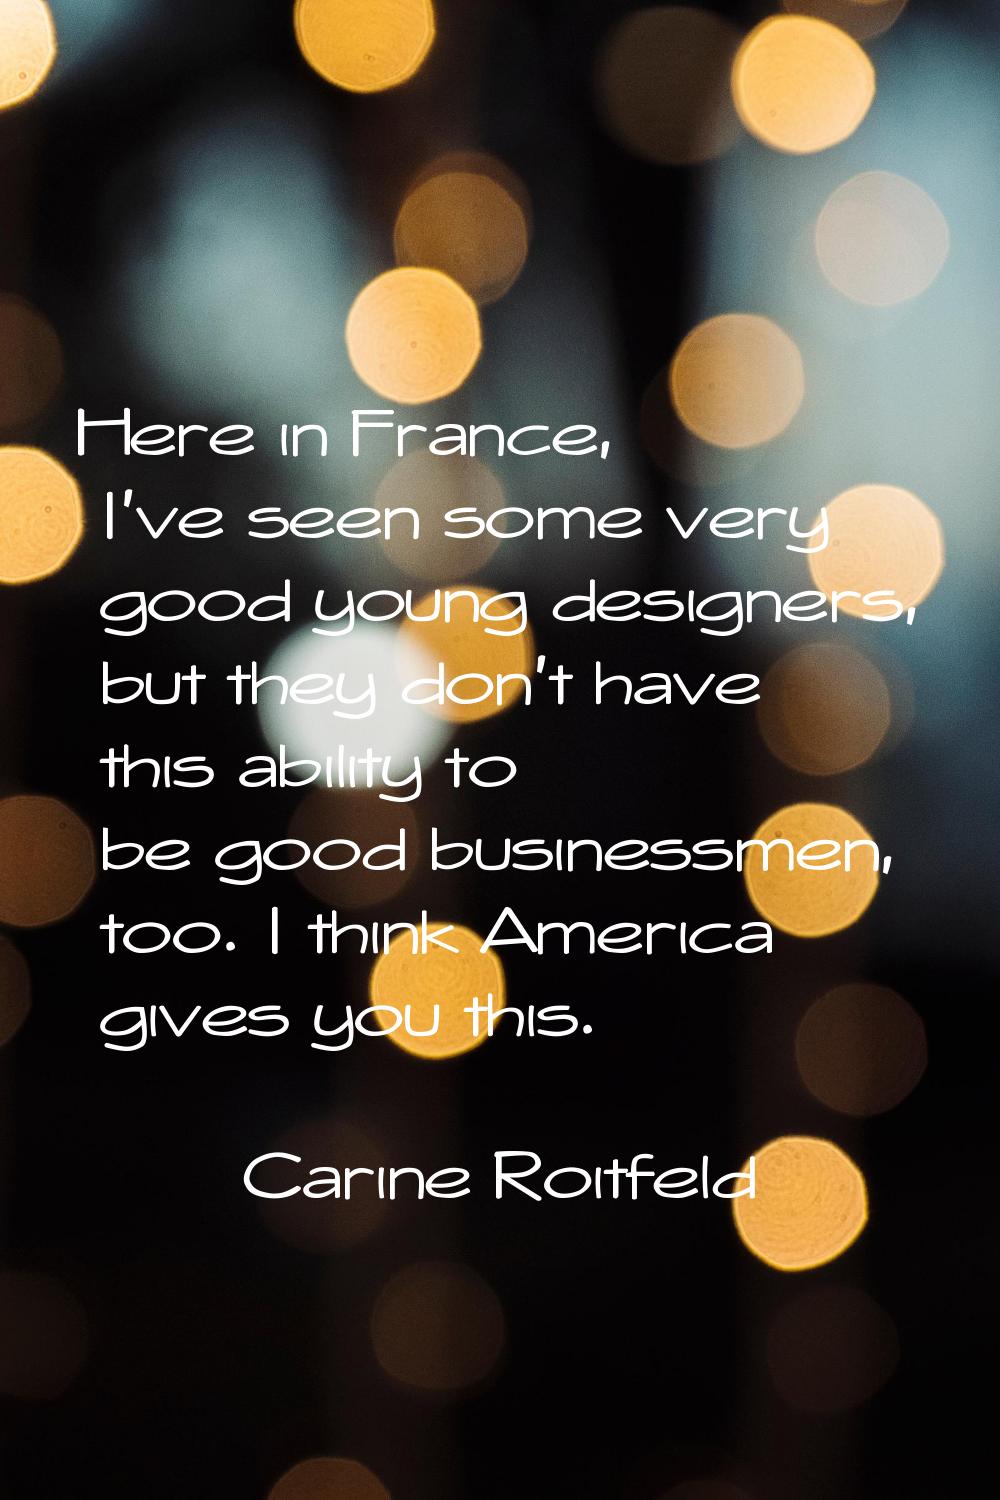 Here in France, I've seen some very good young designers, but they don't have this ability to be go